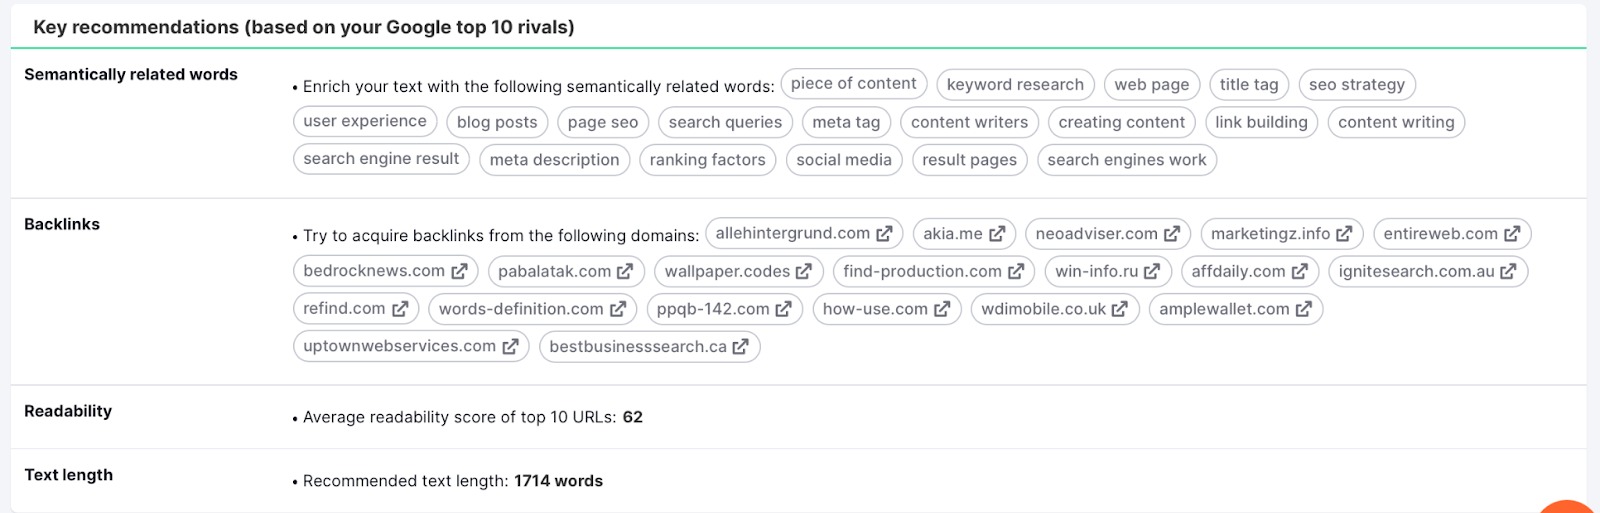 SEO Content Template tool. The Key recommendations based on your Google top 10 rivals for semantically related words, backlinks, readability and text length. 